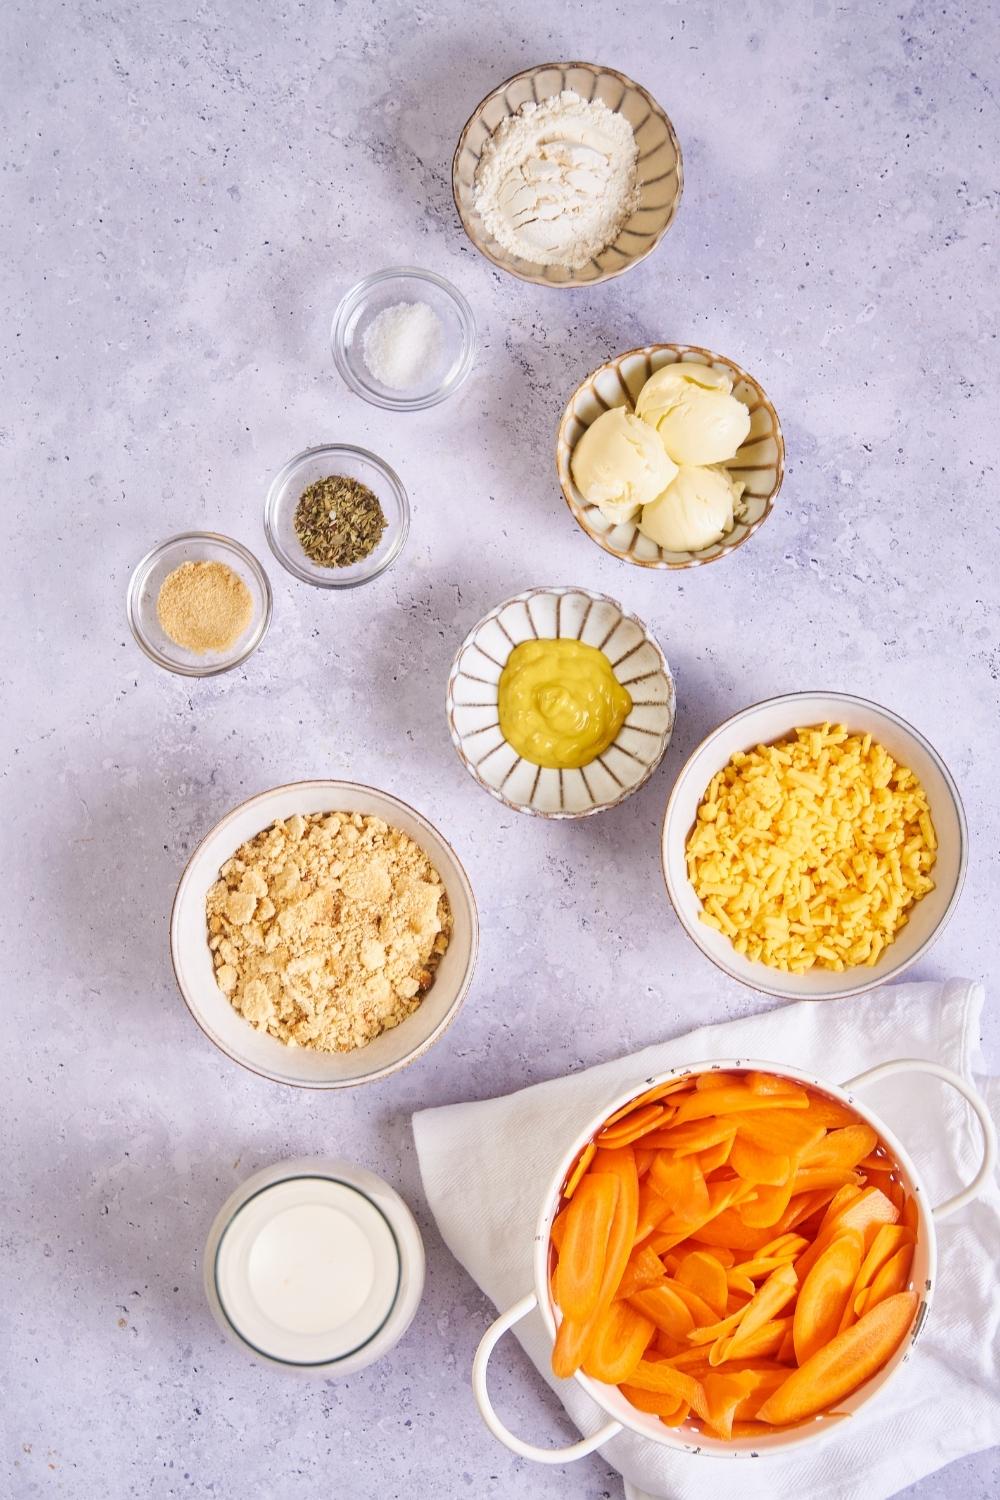 An assortment of ingredients for carrot casserole including bowls of carrots, mustard corn, cheese, flour, and spices.